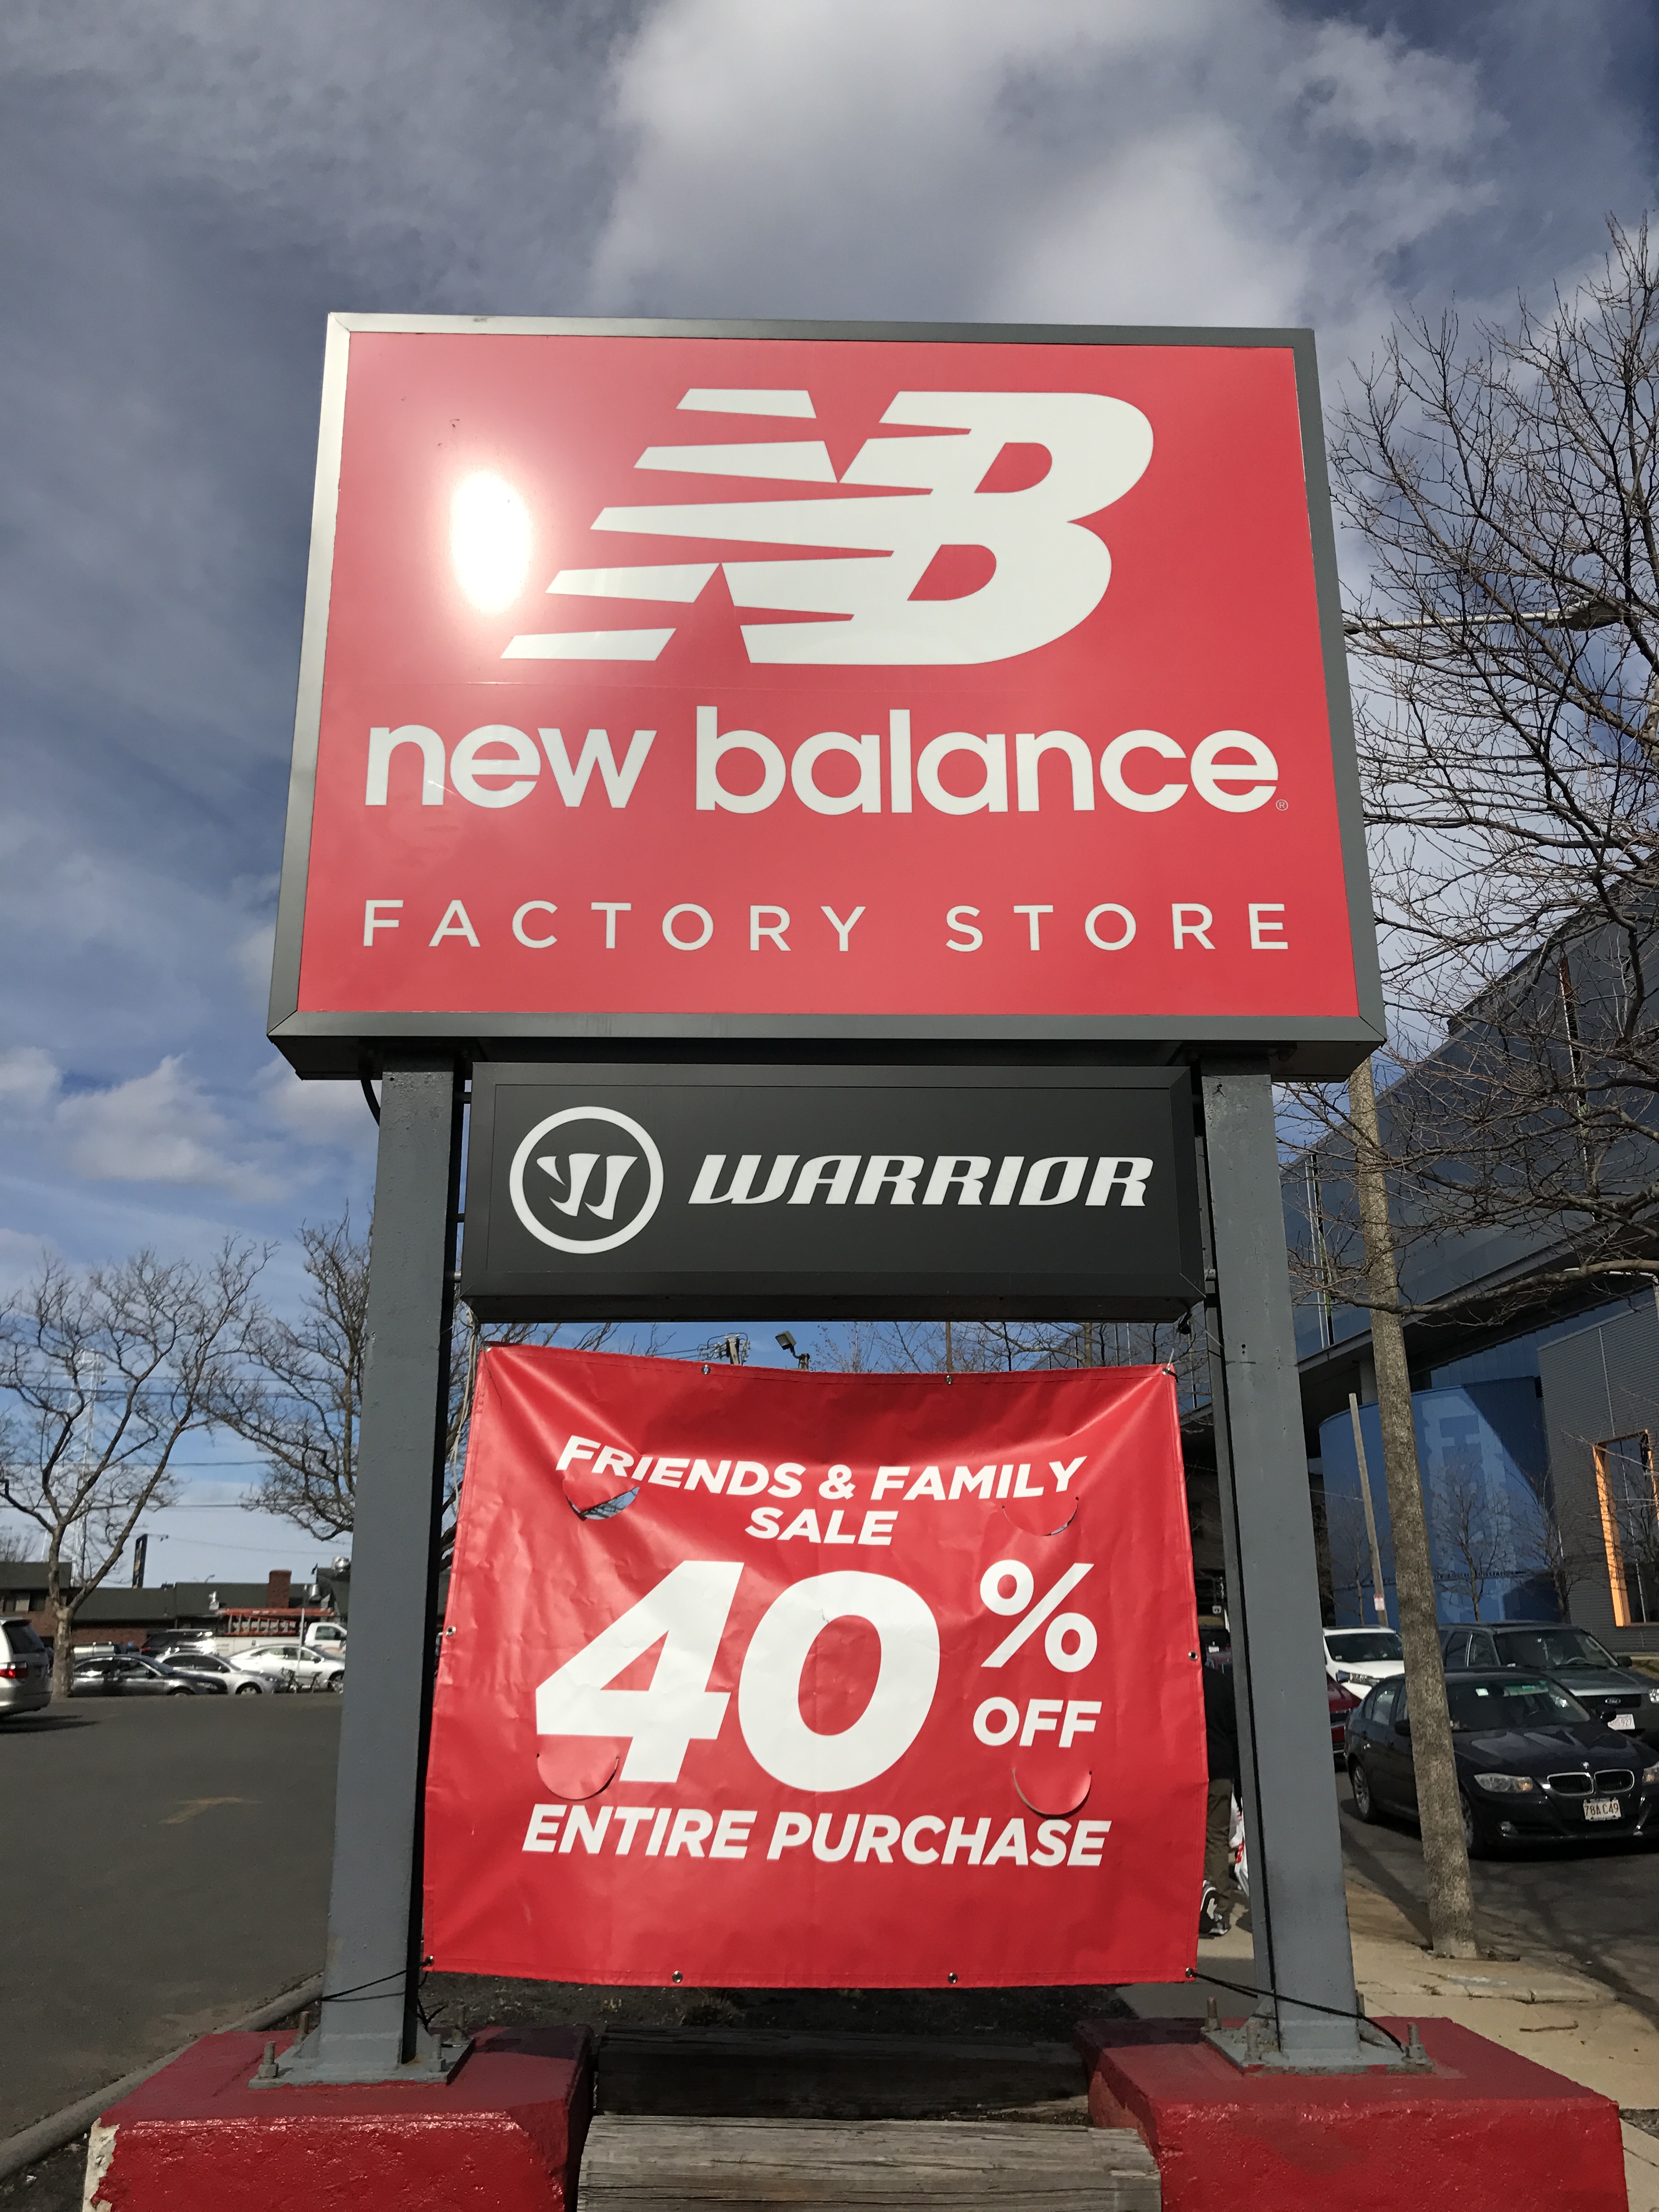 new balance factory store friends and family